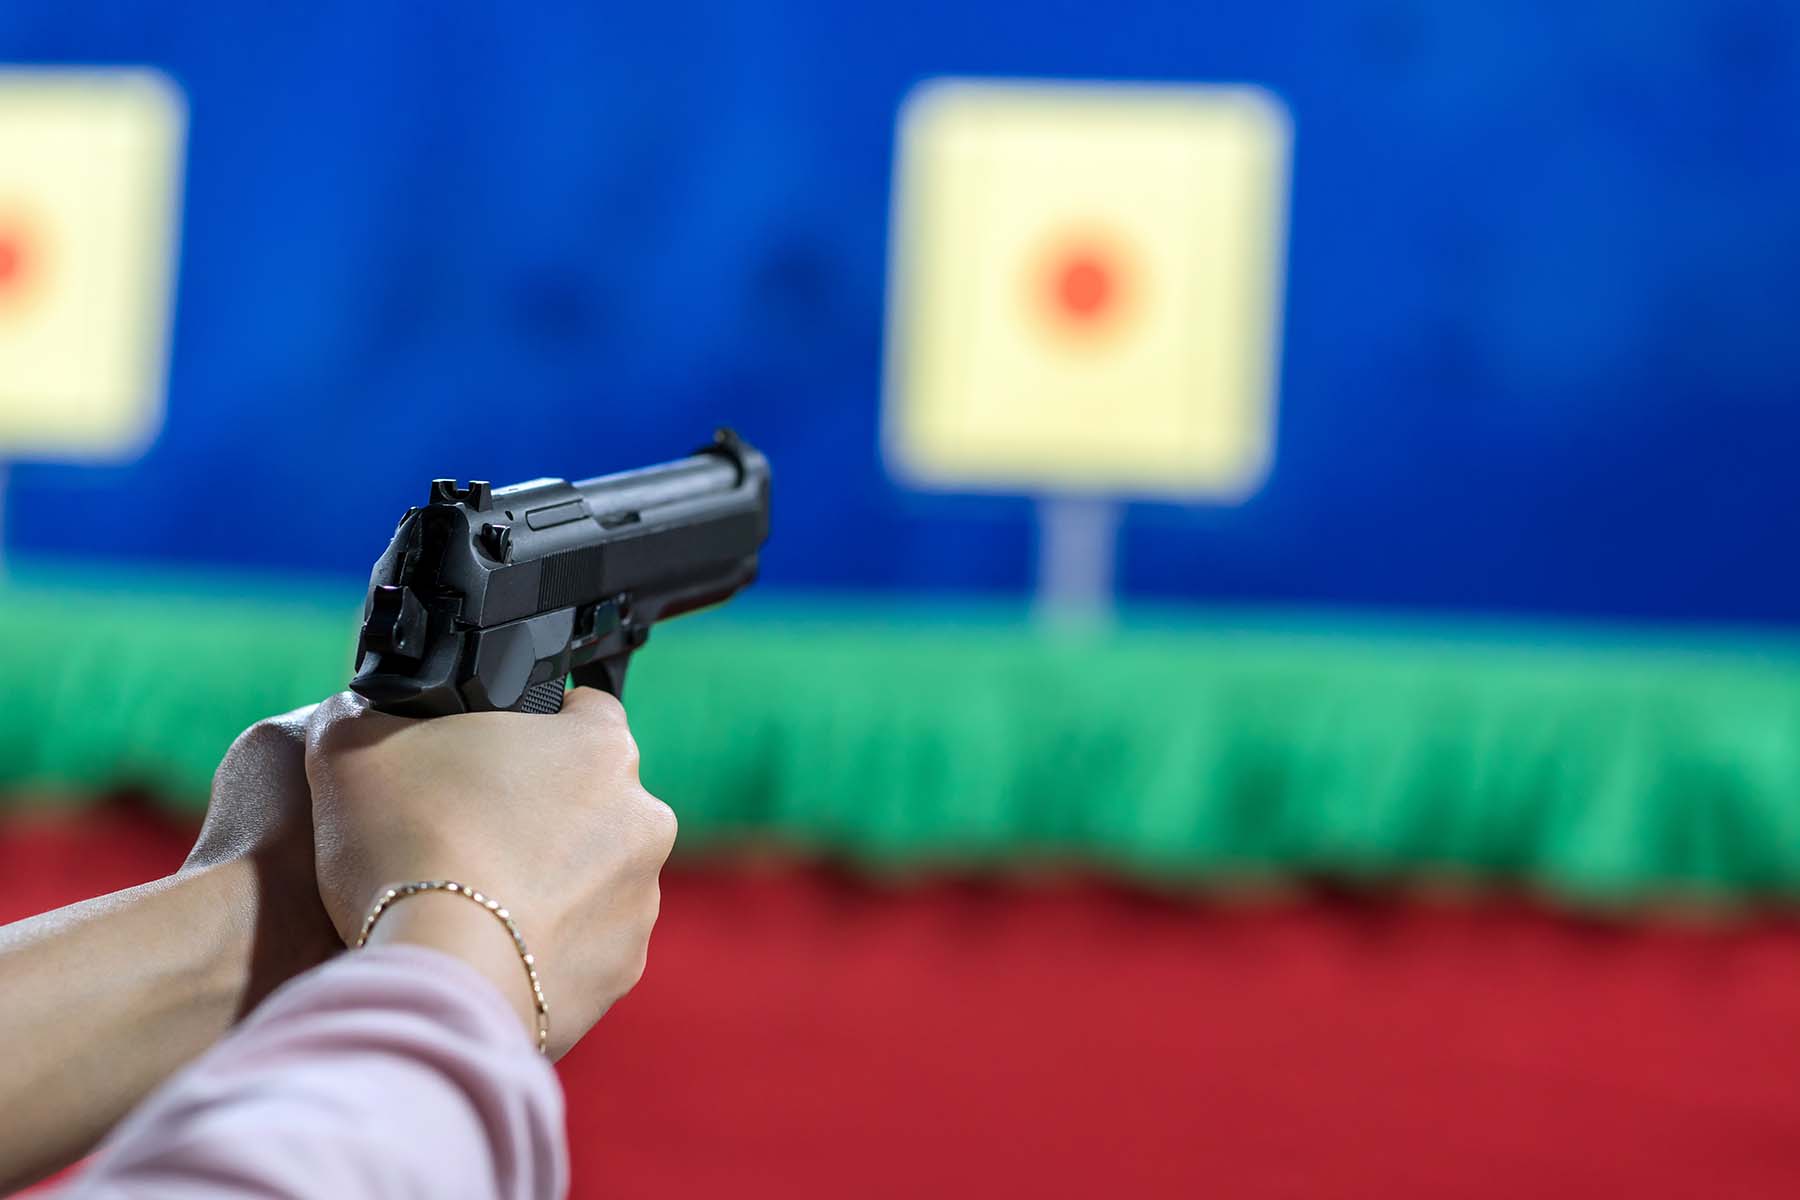 A closeup shot of a woman's arms holding a gun on the shooting range.